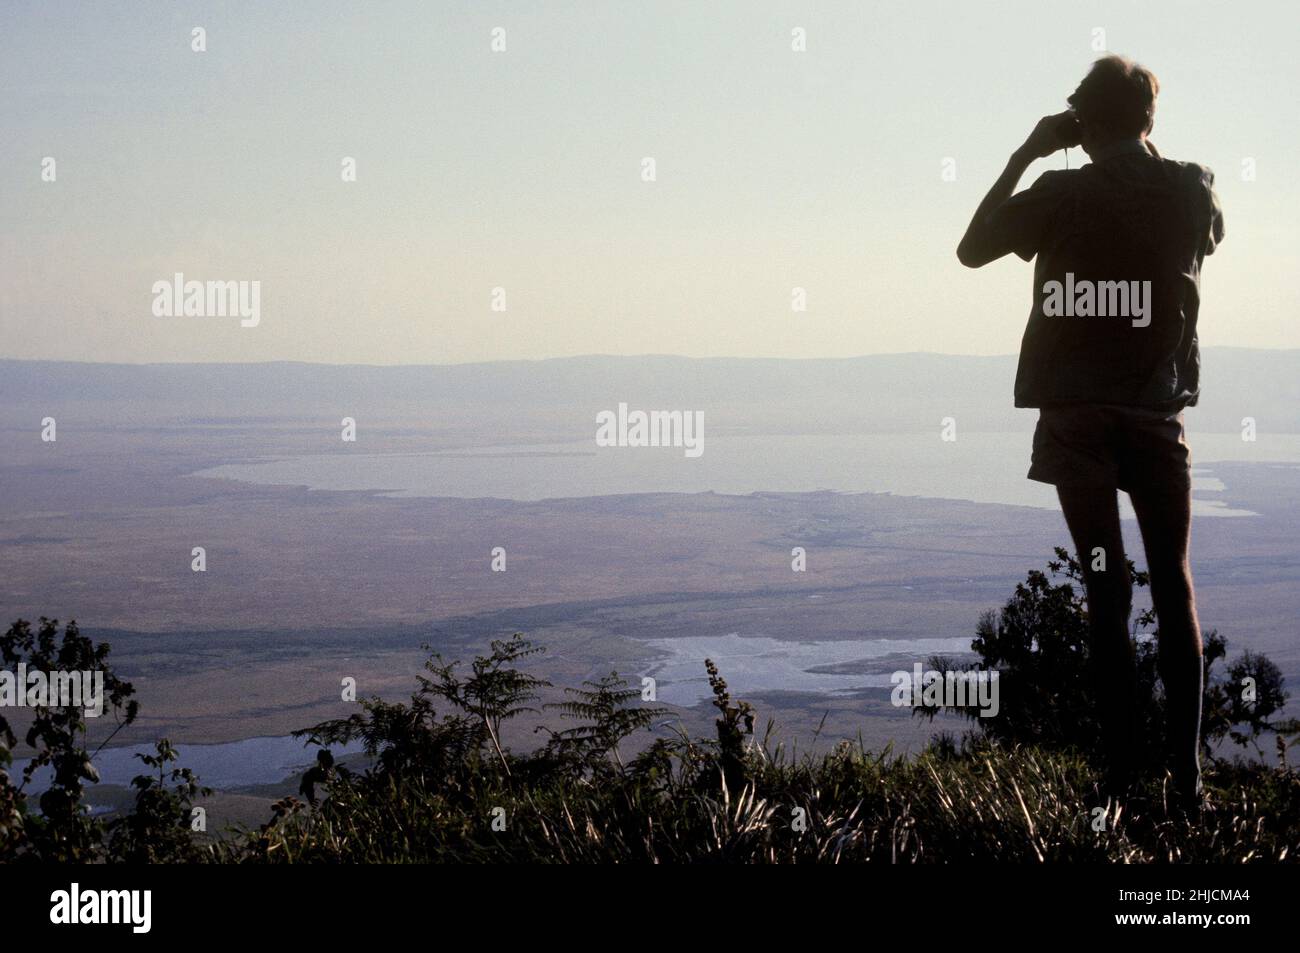 Philip Leakey looking out over the Rift Valley, near Lake Manyara, Tanzania. Philip Leakey is the son of Louis and Mary Leakey, both famous paleontologists. He served as a member of the Kenyan Parliament from 1979 to 1992. Stock Photo